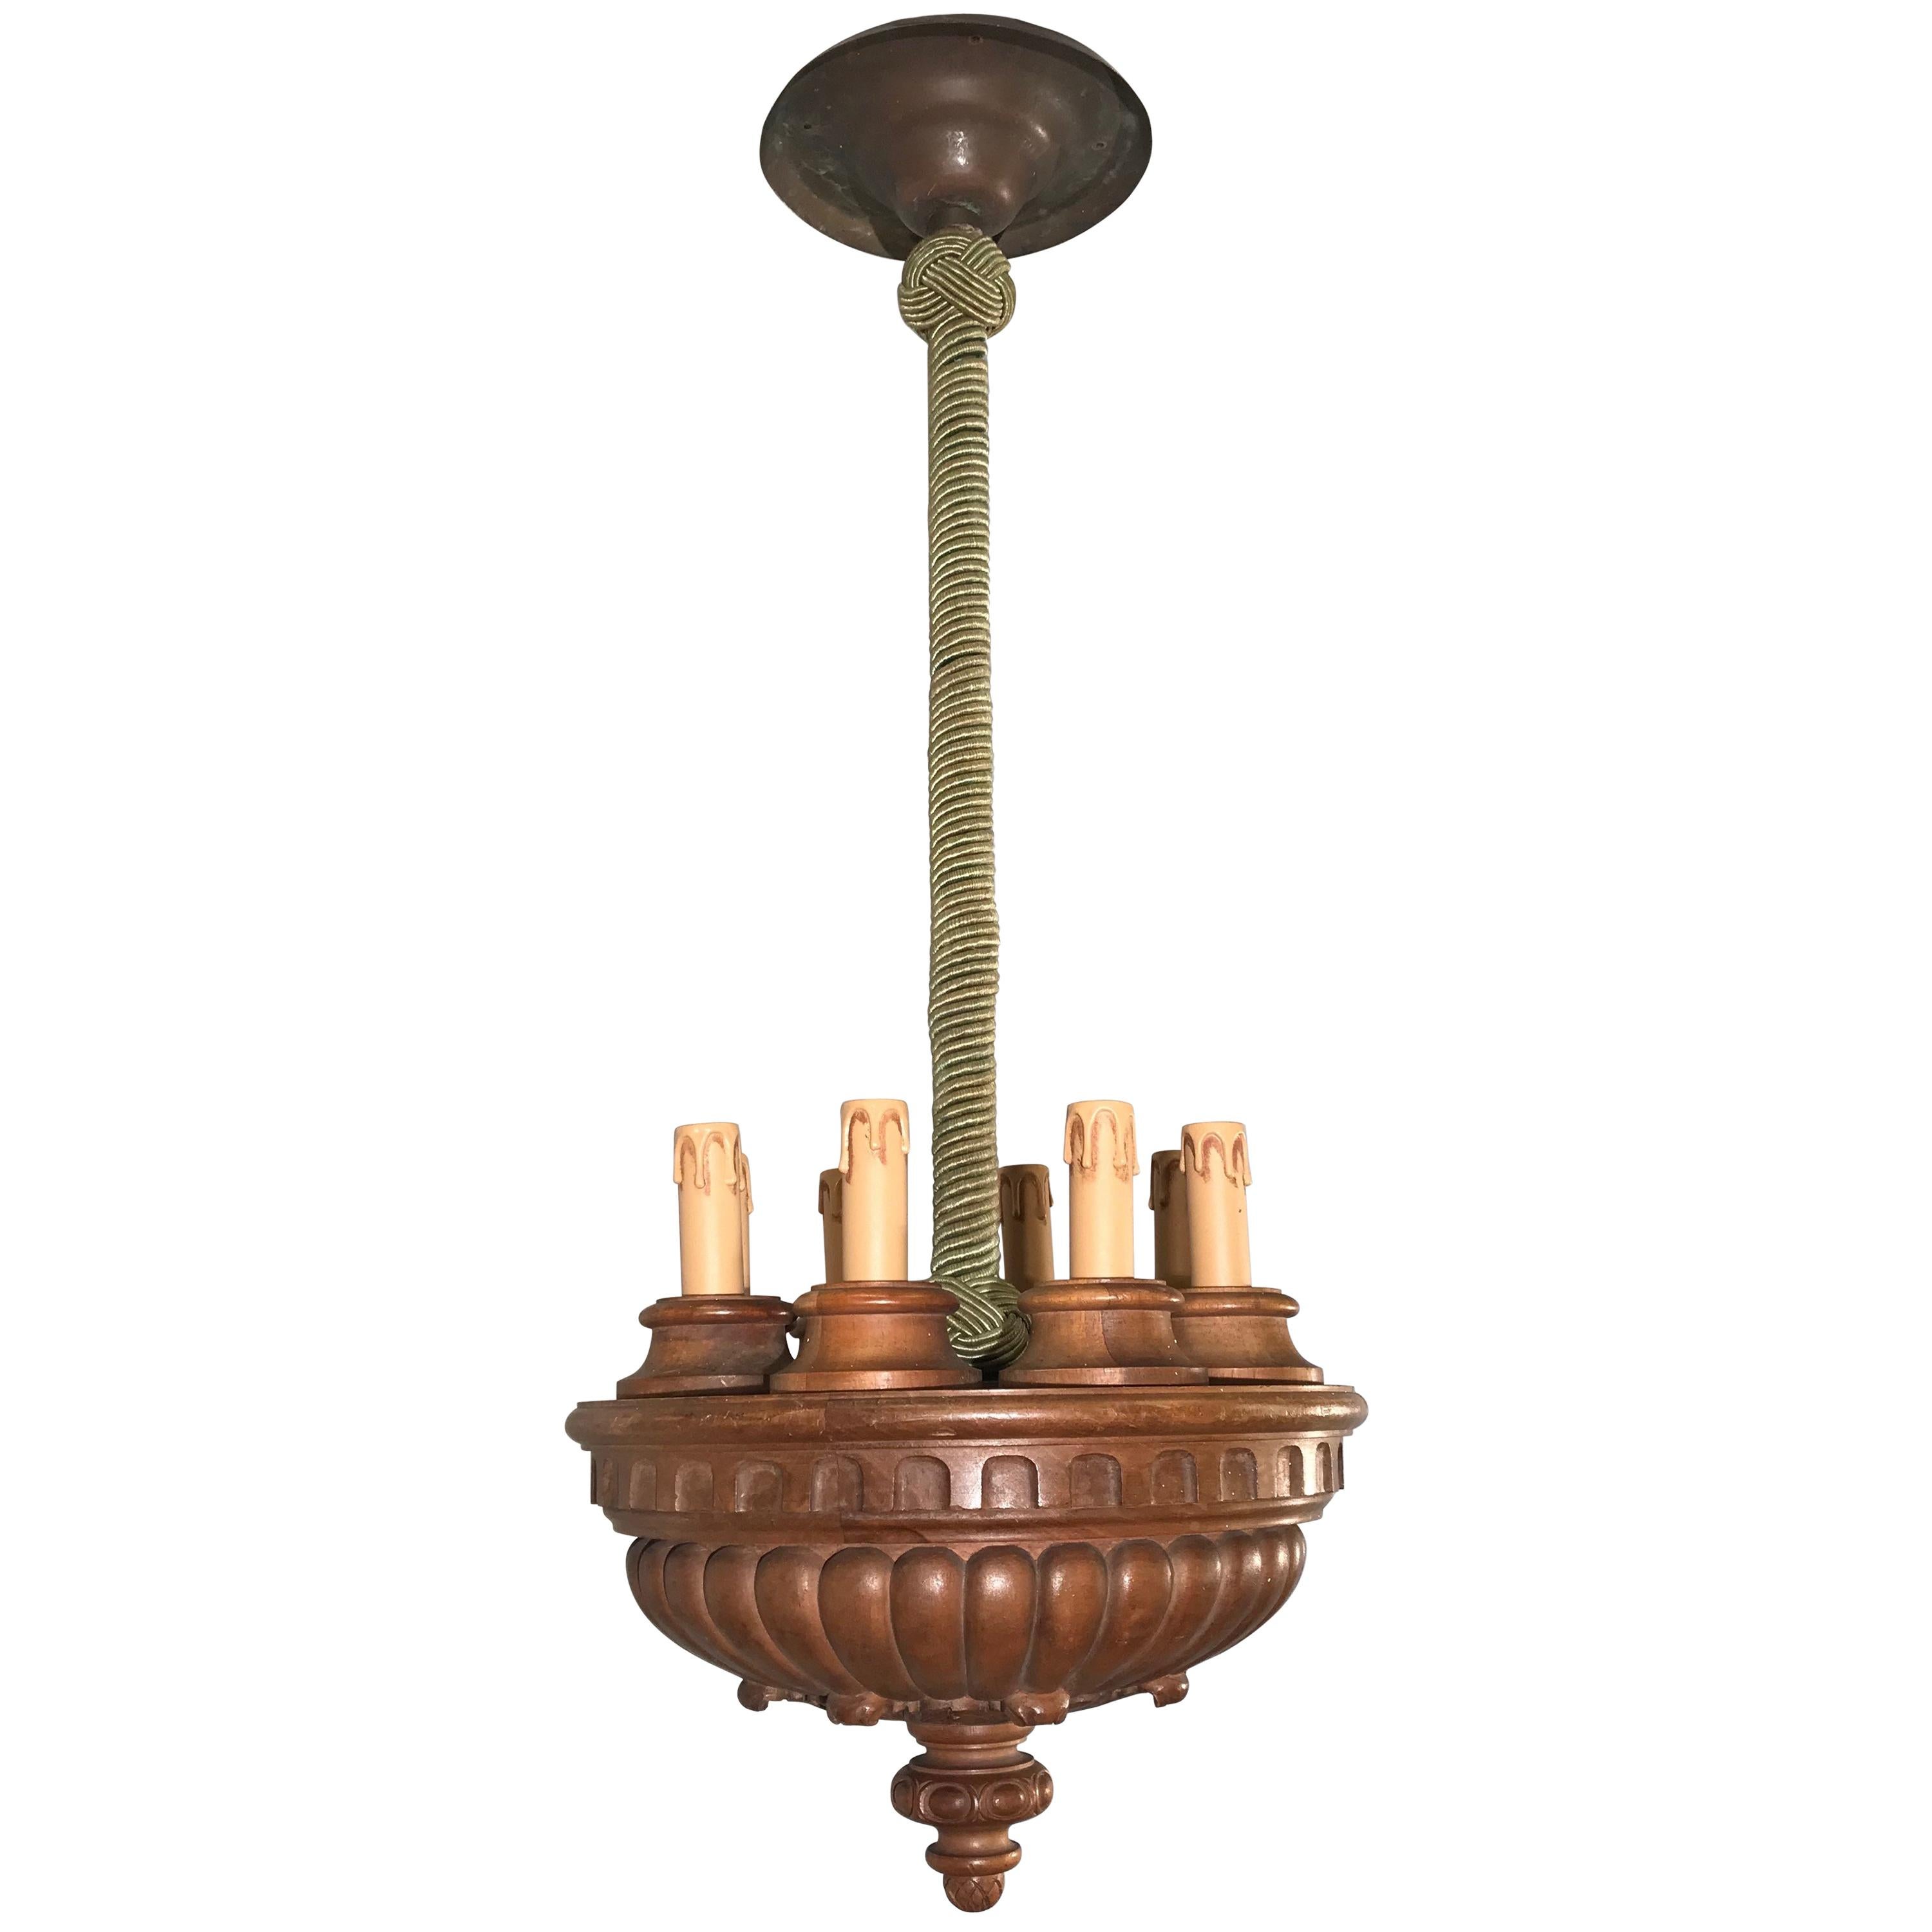 Rare and Decorative Early 1900s Eight-Light Quality Carved Nutwood Pendant Light For Sale